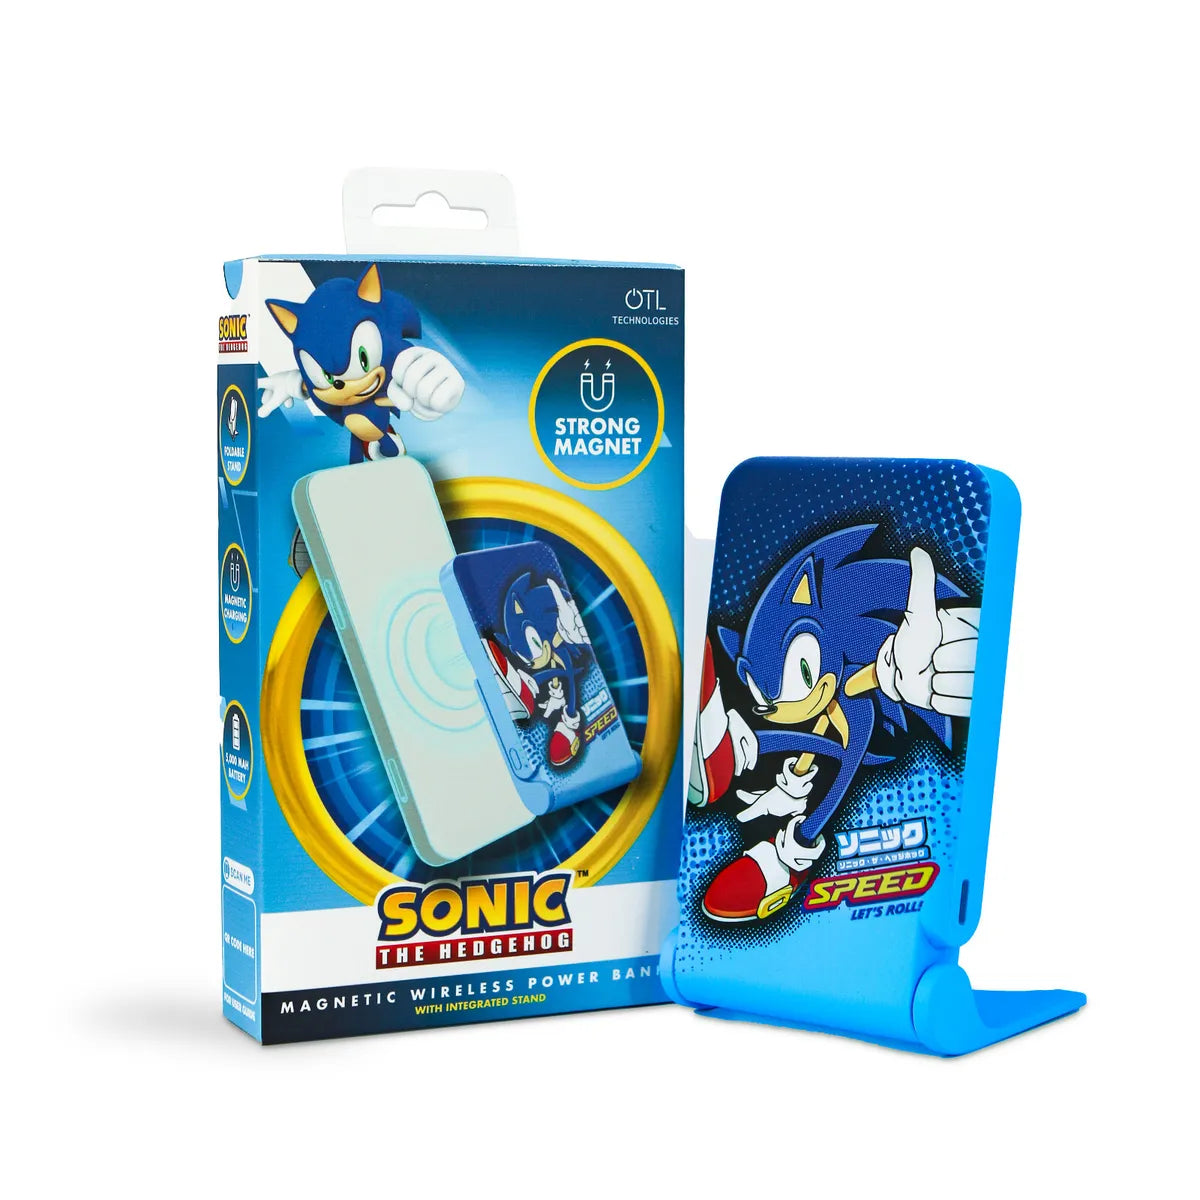 Power Bank OTL Sonic Magnetic Wireless - Albagame